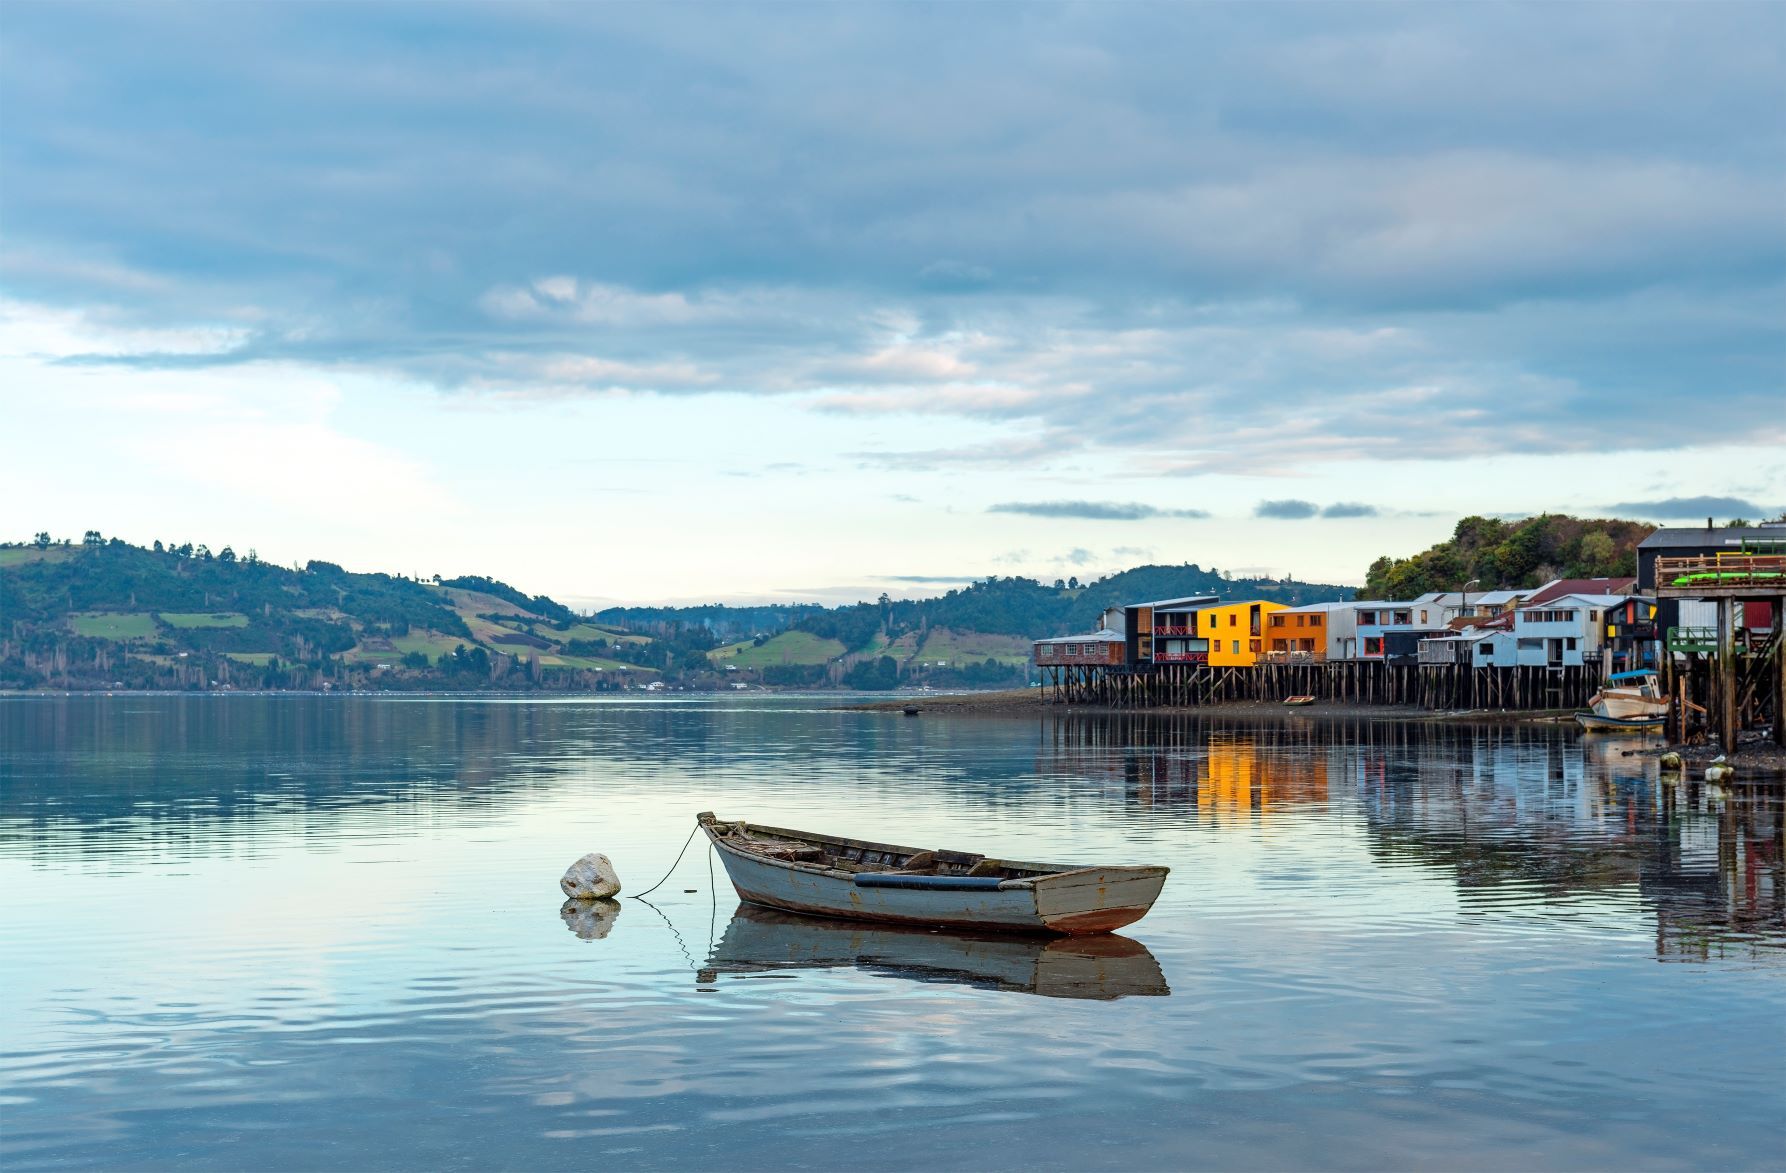  A lone fishing boat by the palafitos stilt houses in Castro, Chiloe Island, Chile.